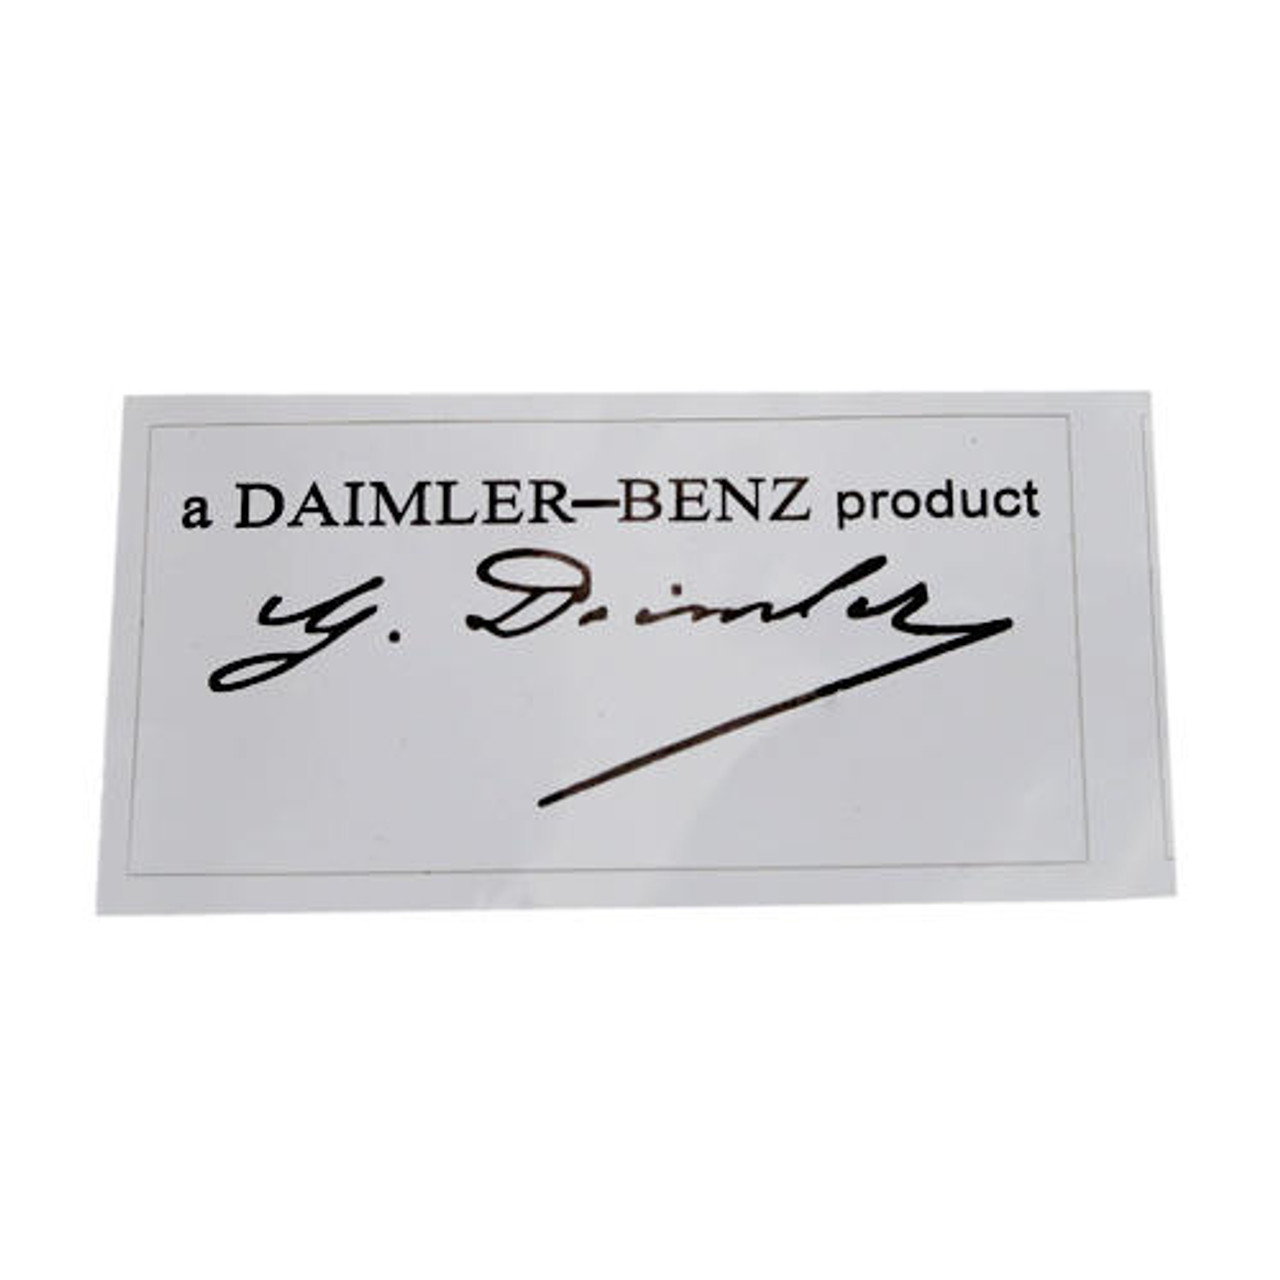 Mercedes-Benz Windshield sticker for Mercedes classic cars - The SL Shop